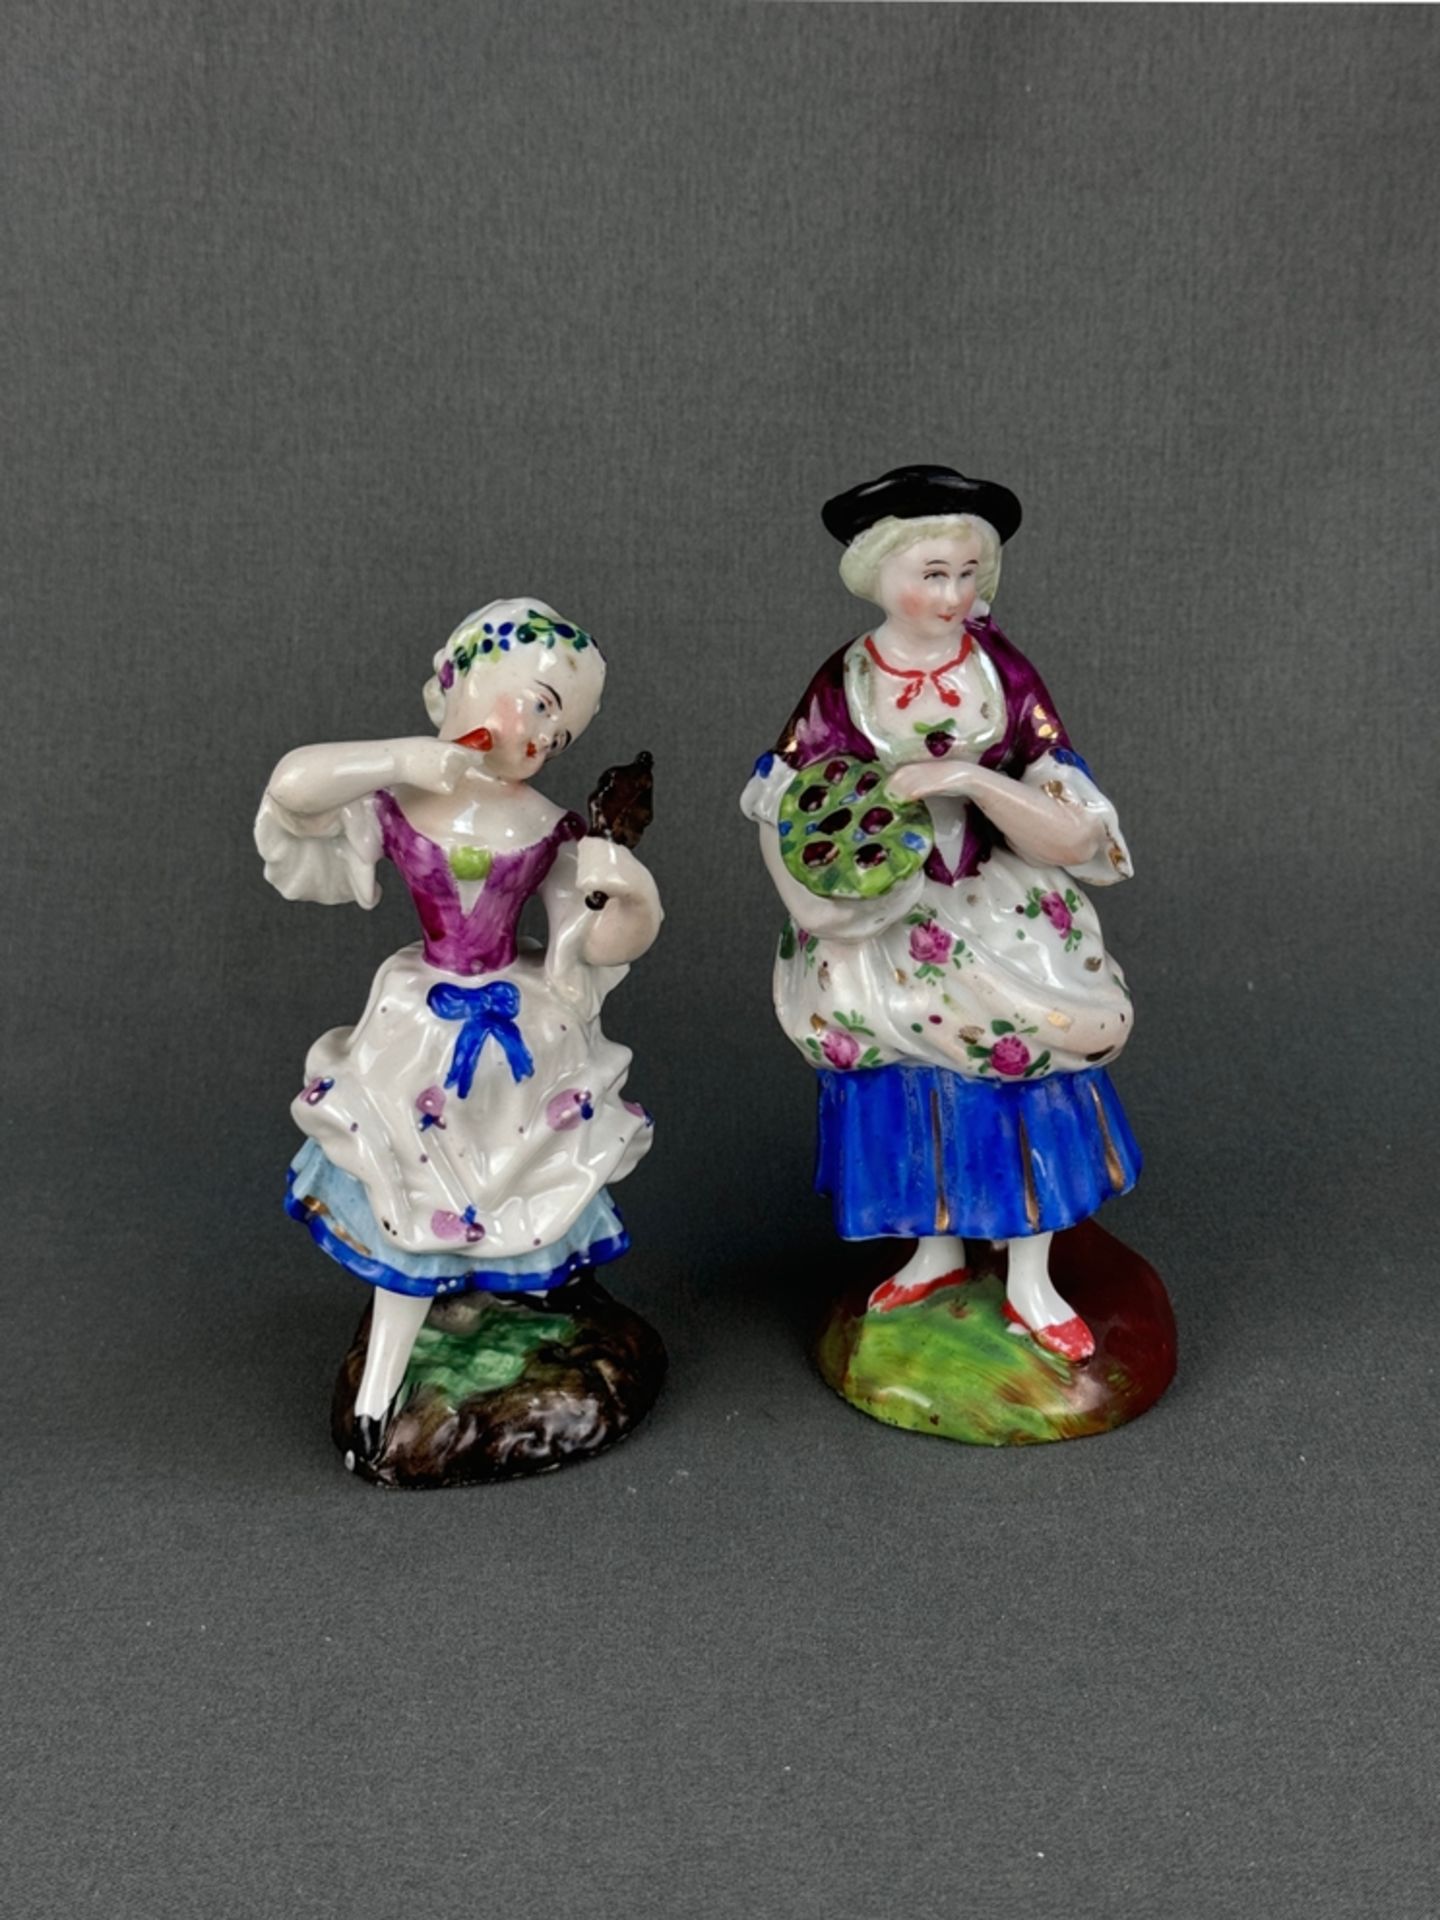 Two porcelain figurines "Woman with mirror" and "Woman with basket of flowers", polychrome hand-pai